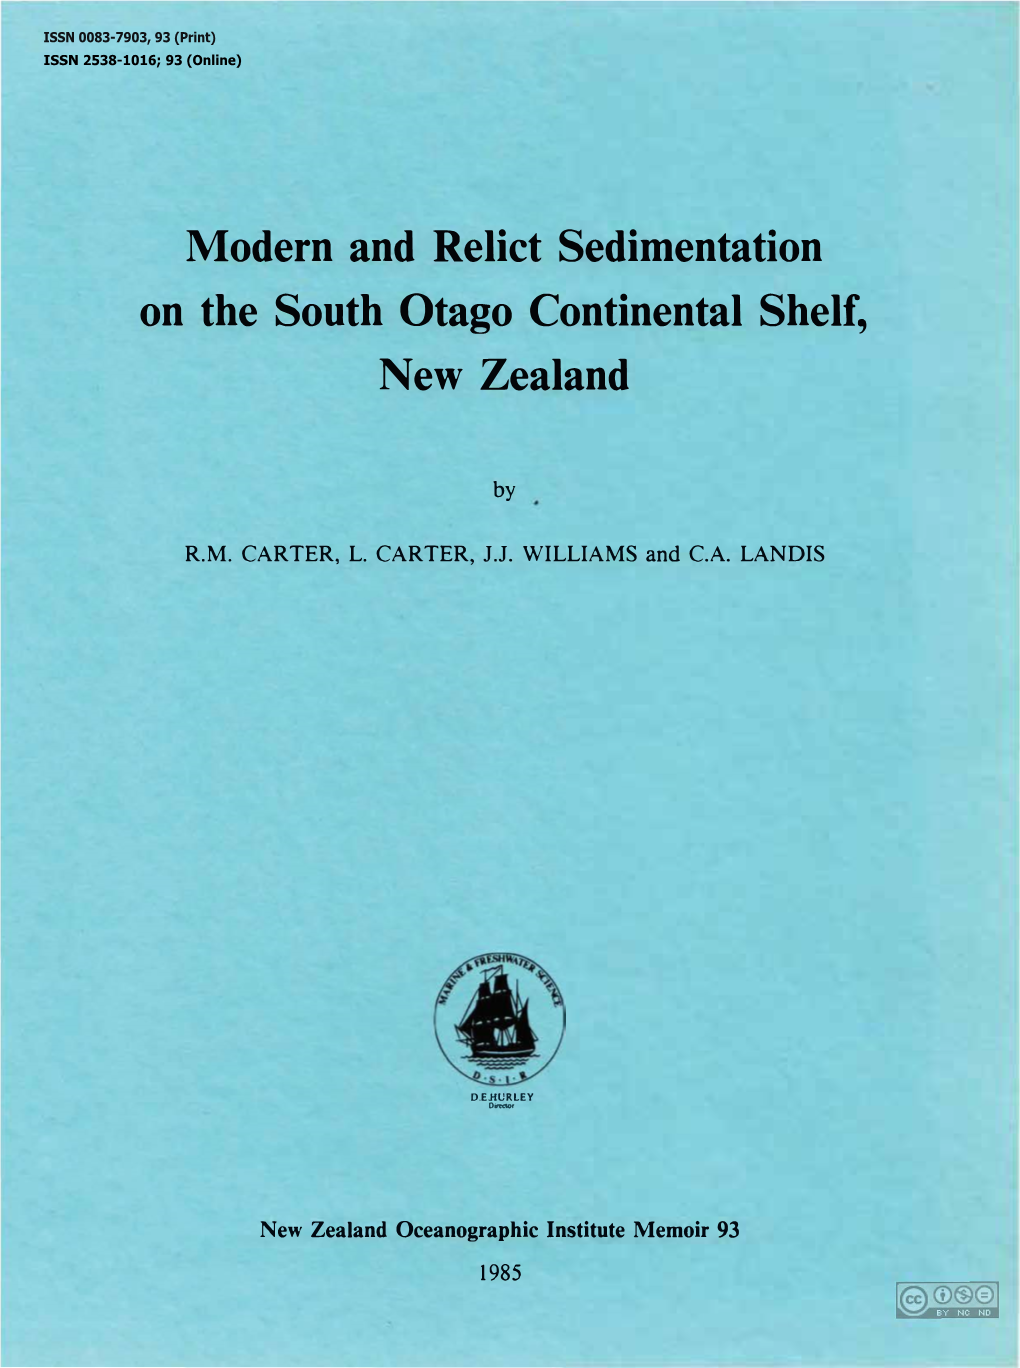 Modern and Relict Sedimentation on the South Otago Continental Shelf, New Zealand